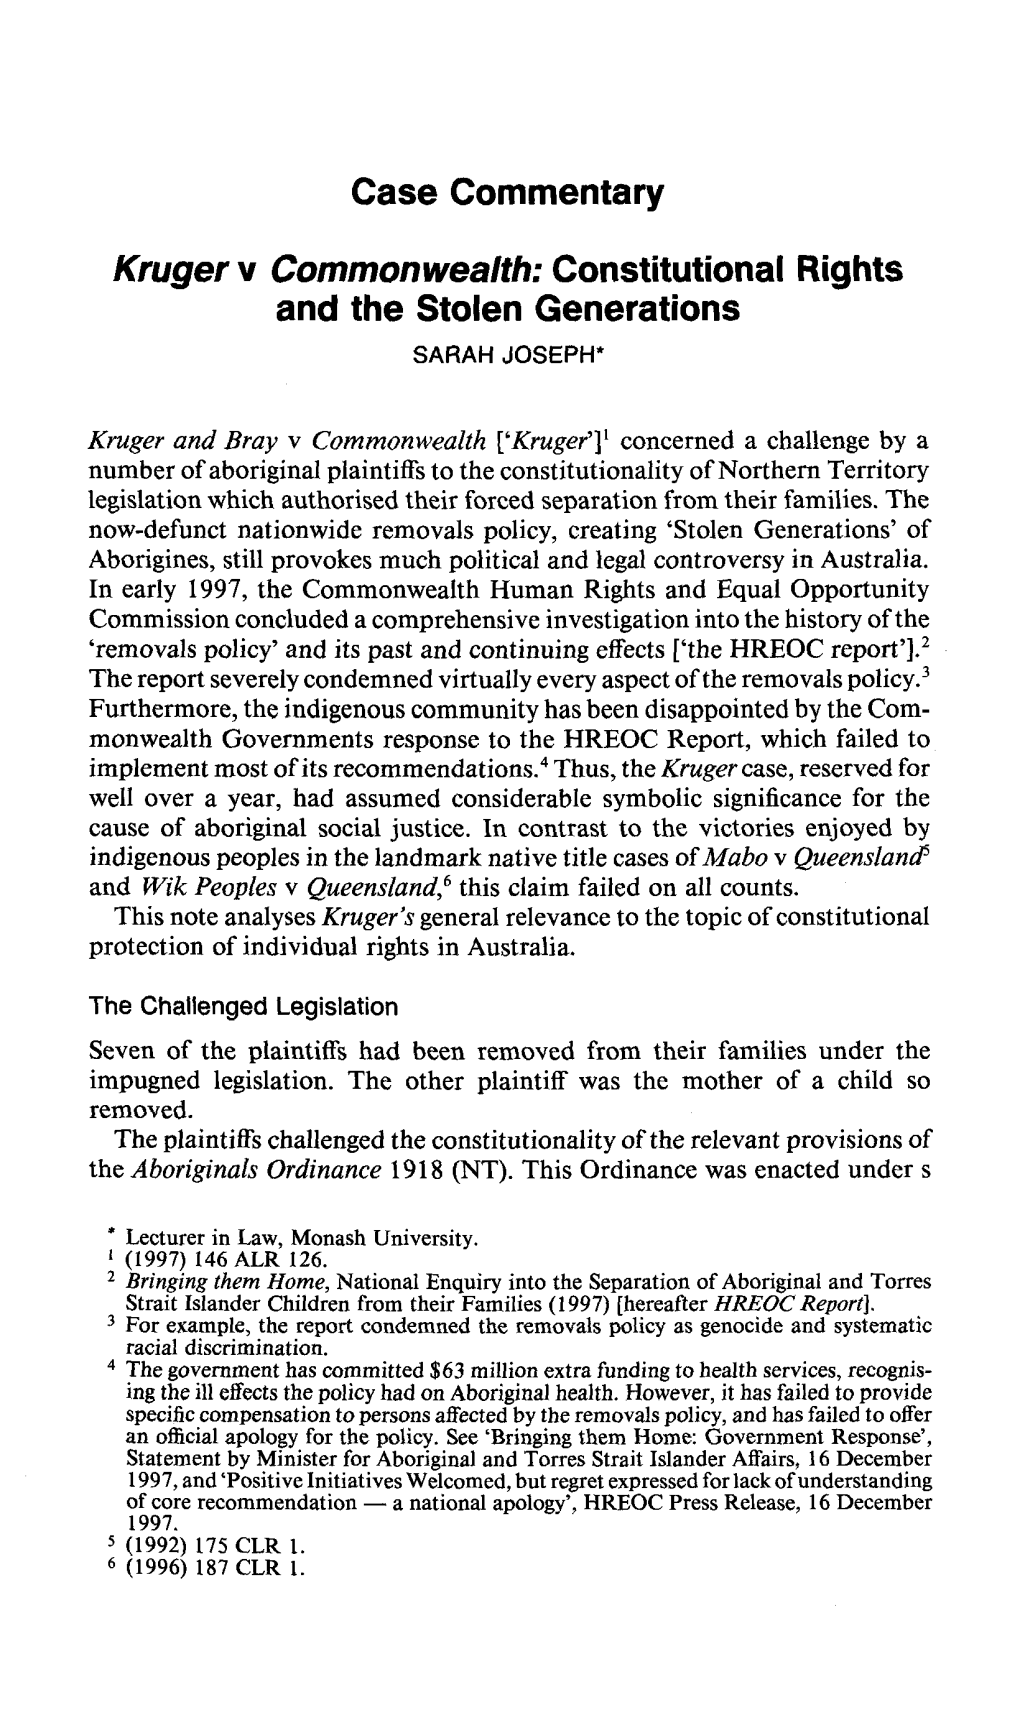 Kruger V Commonwealth: Constitutional Rights and the Stolen Generations SARAH JOSEPH*